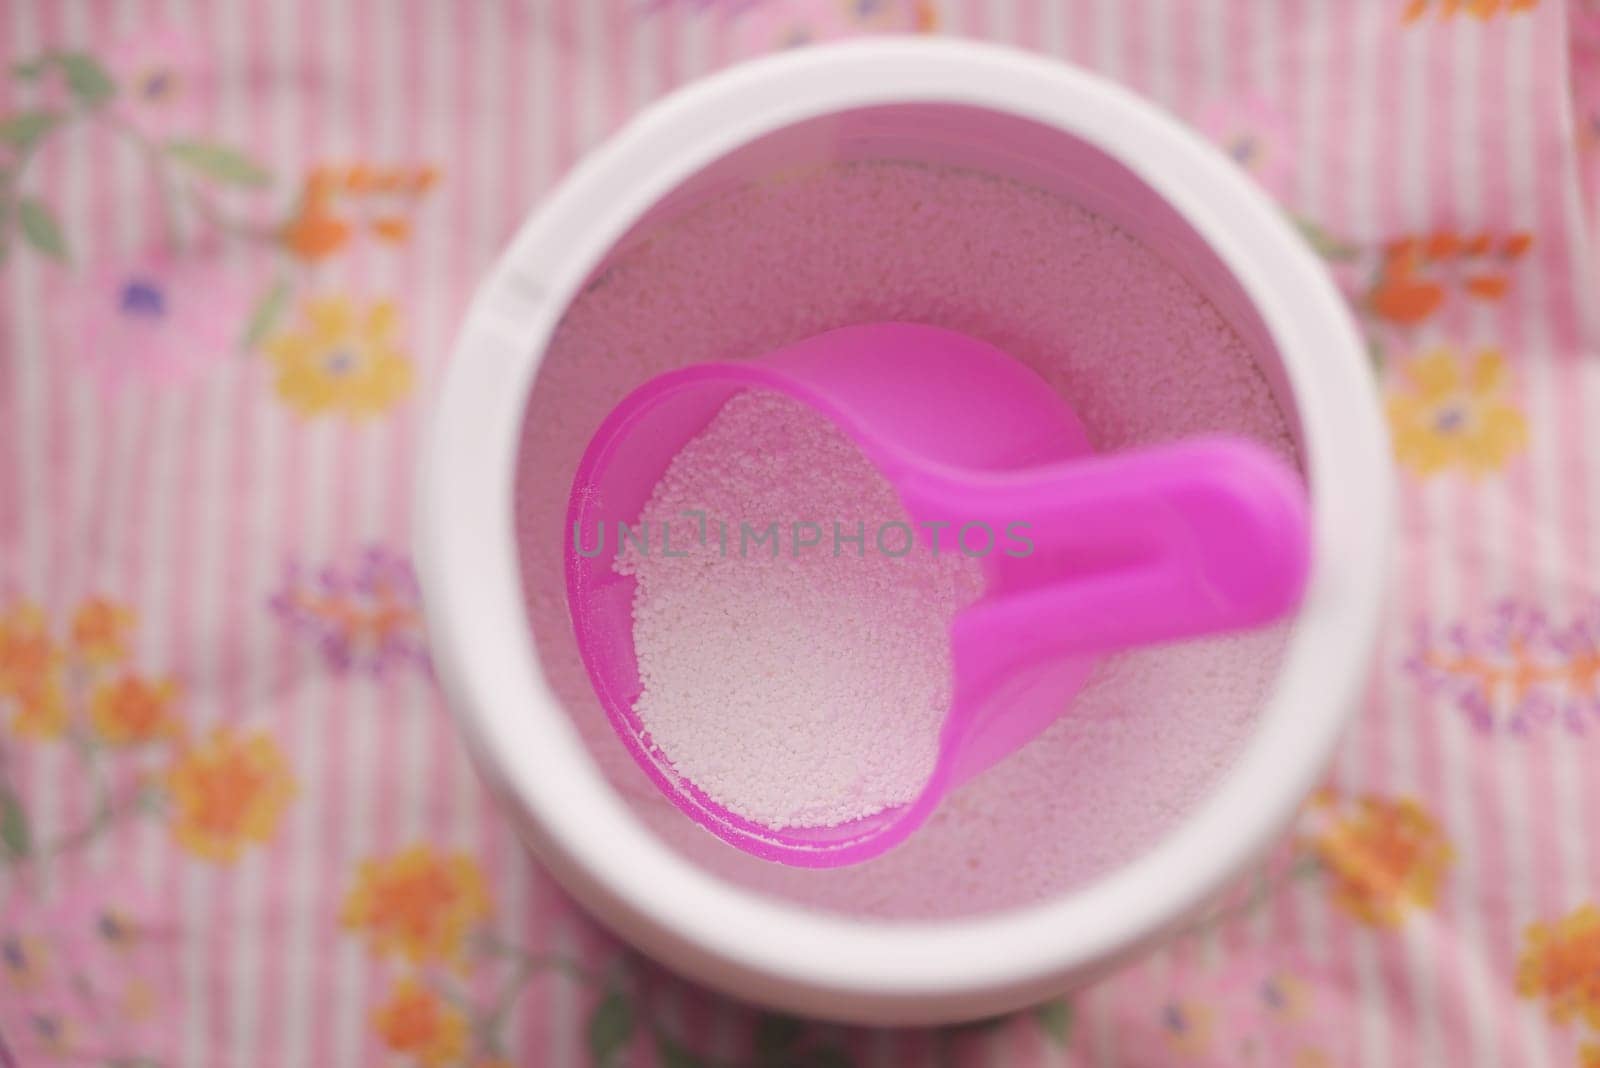 Washing powder in plastic spoon on blue background by towfiq007